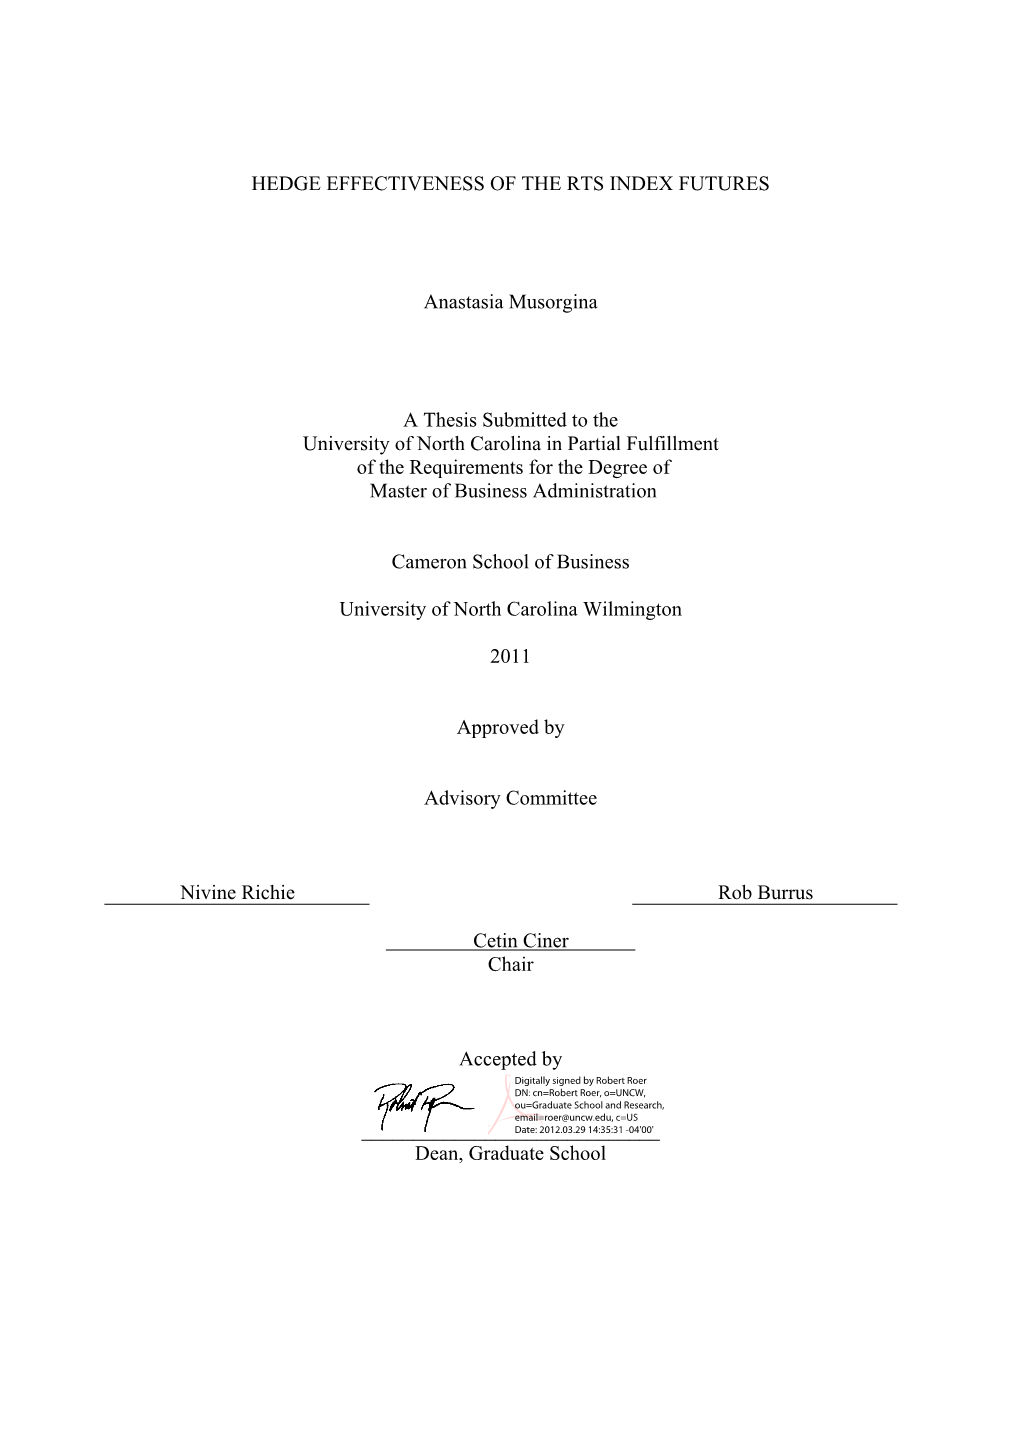 HEDGE EFFECTIVENESS of the RTS INDEX FUTURES Anastasia Musorgina a Thesis Submitted to the University of North Carolina in Part